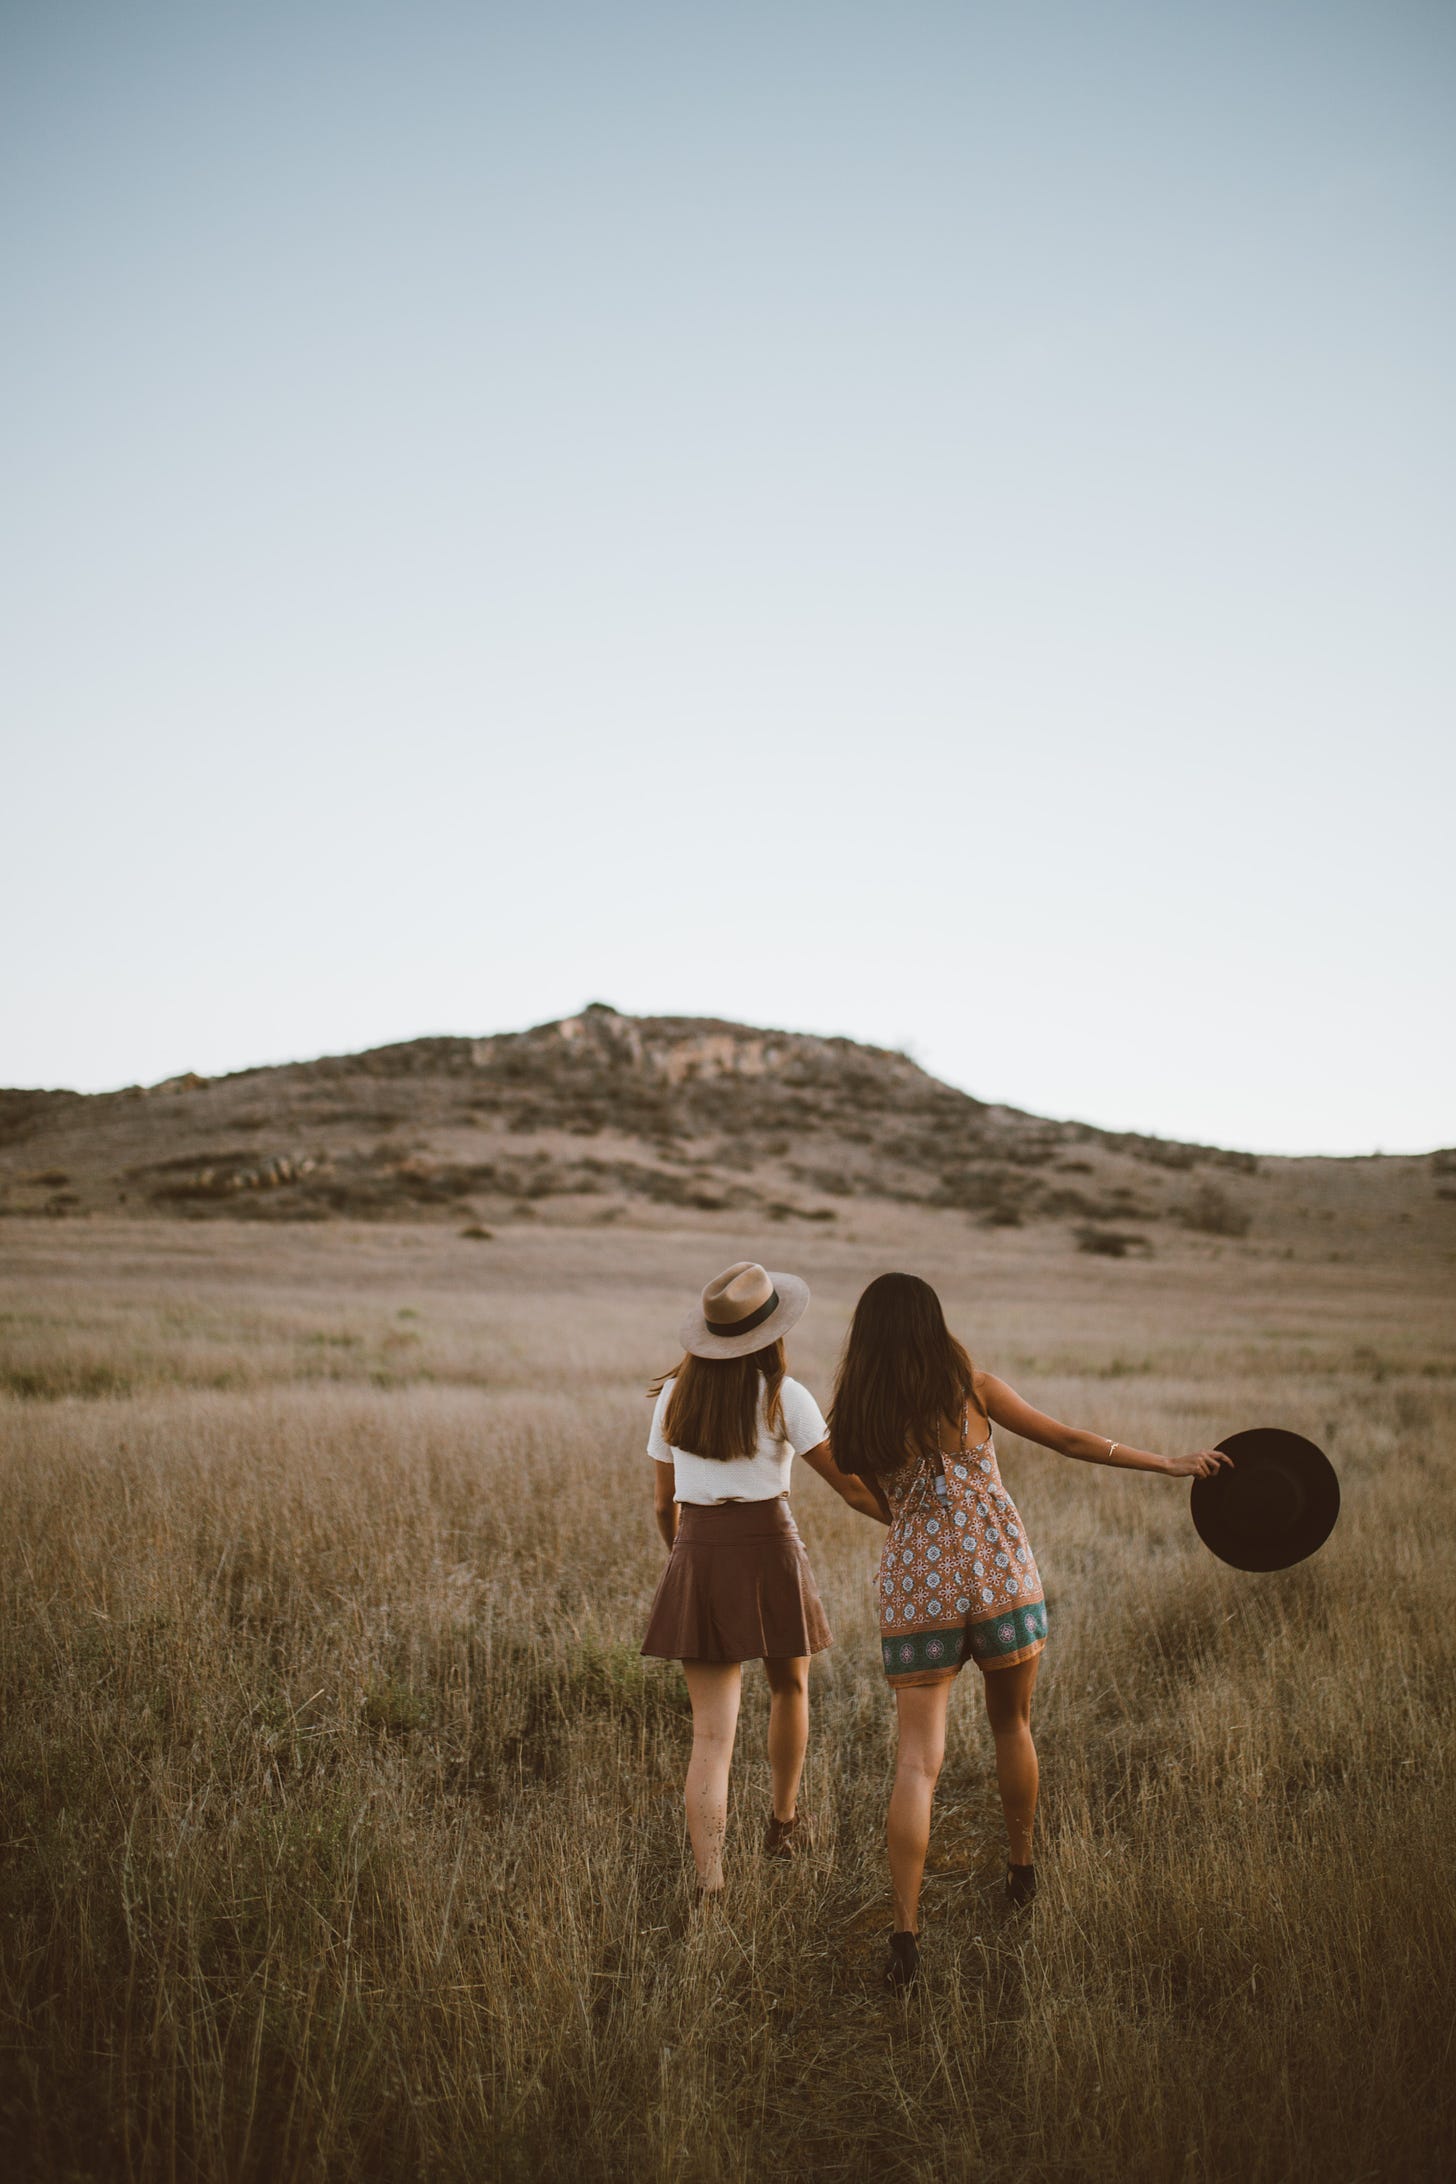 Two girls walking through the fields towards a hill